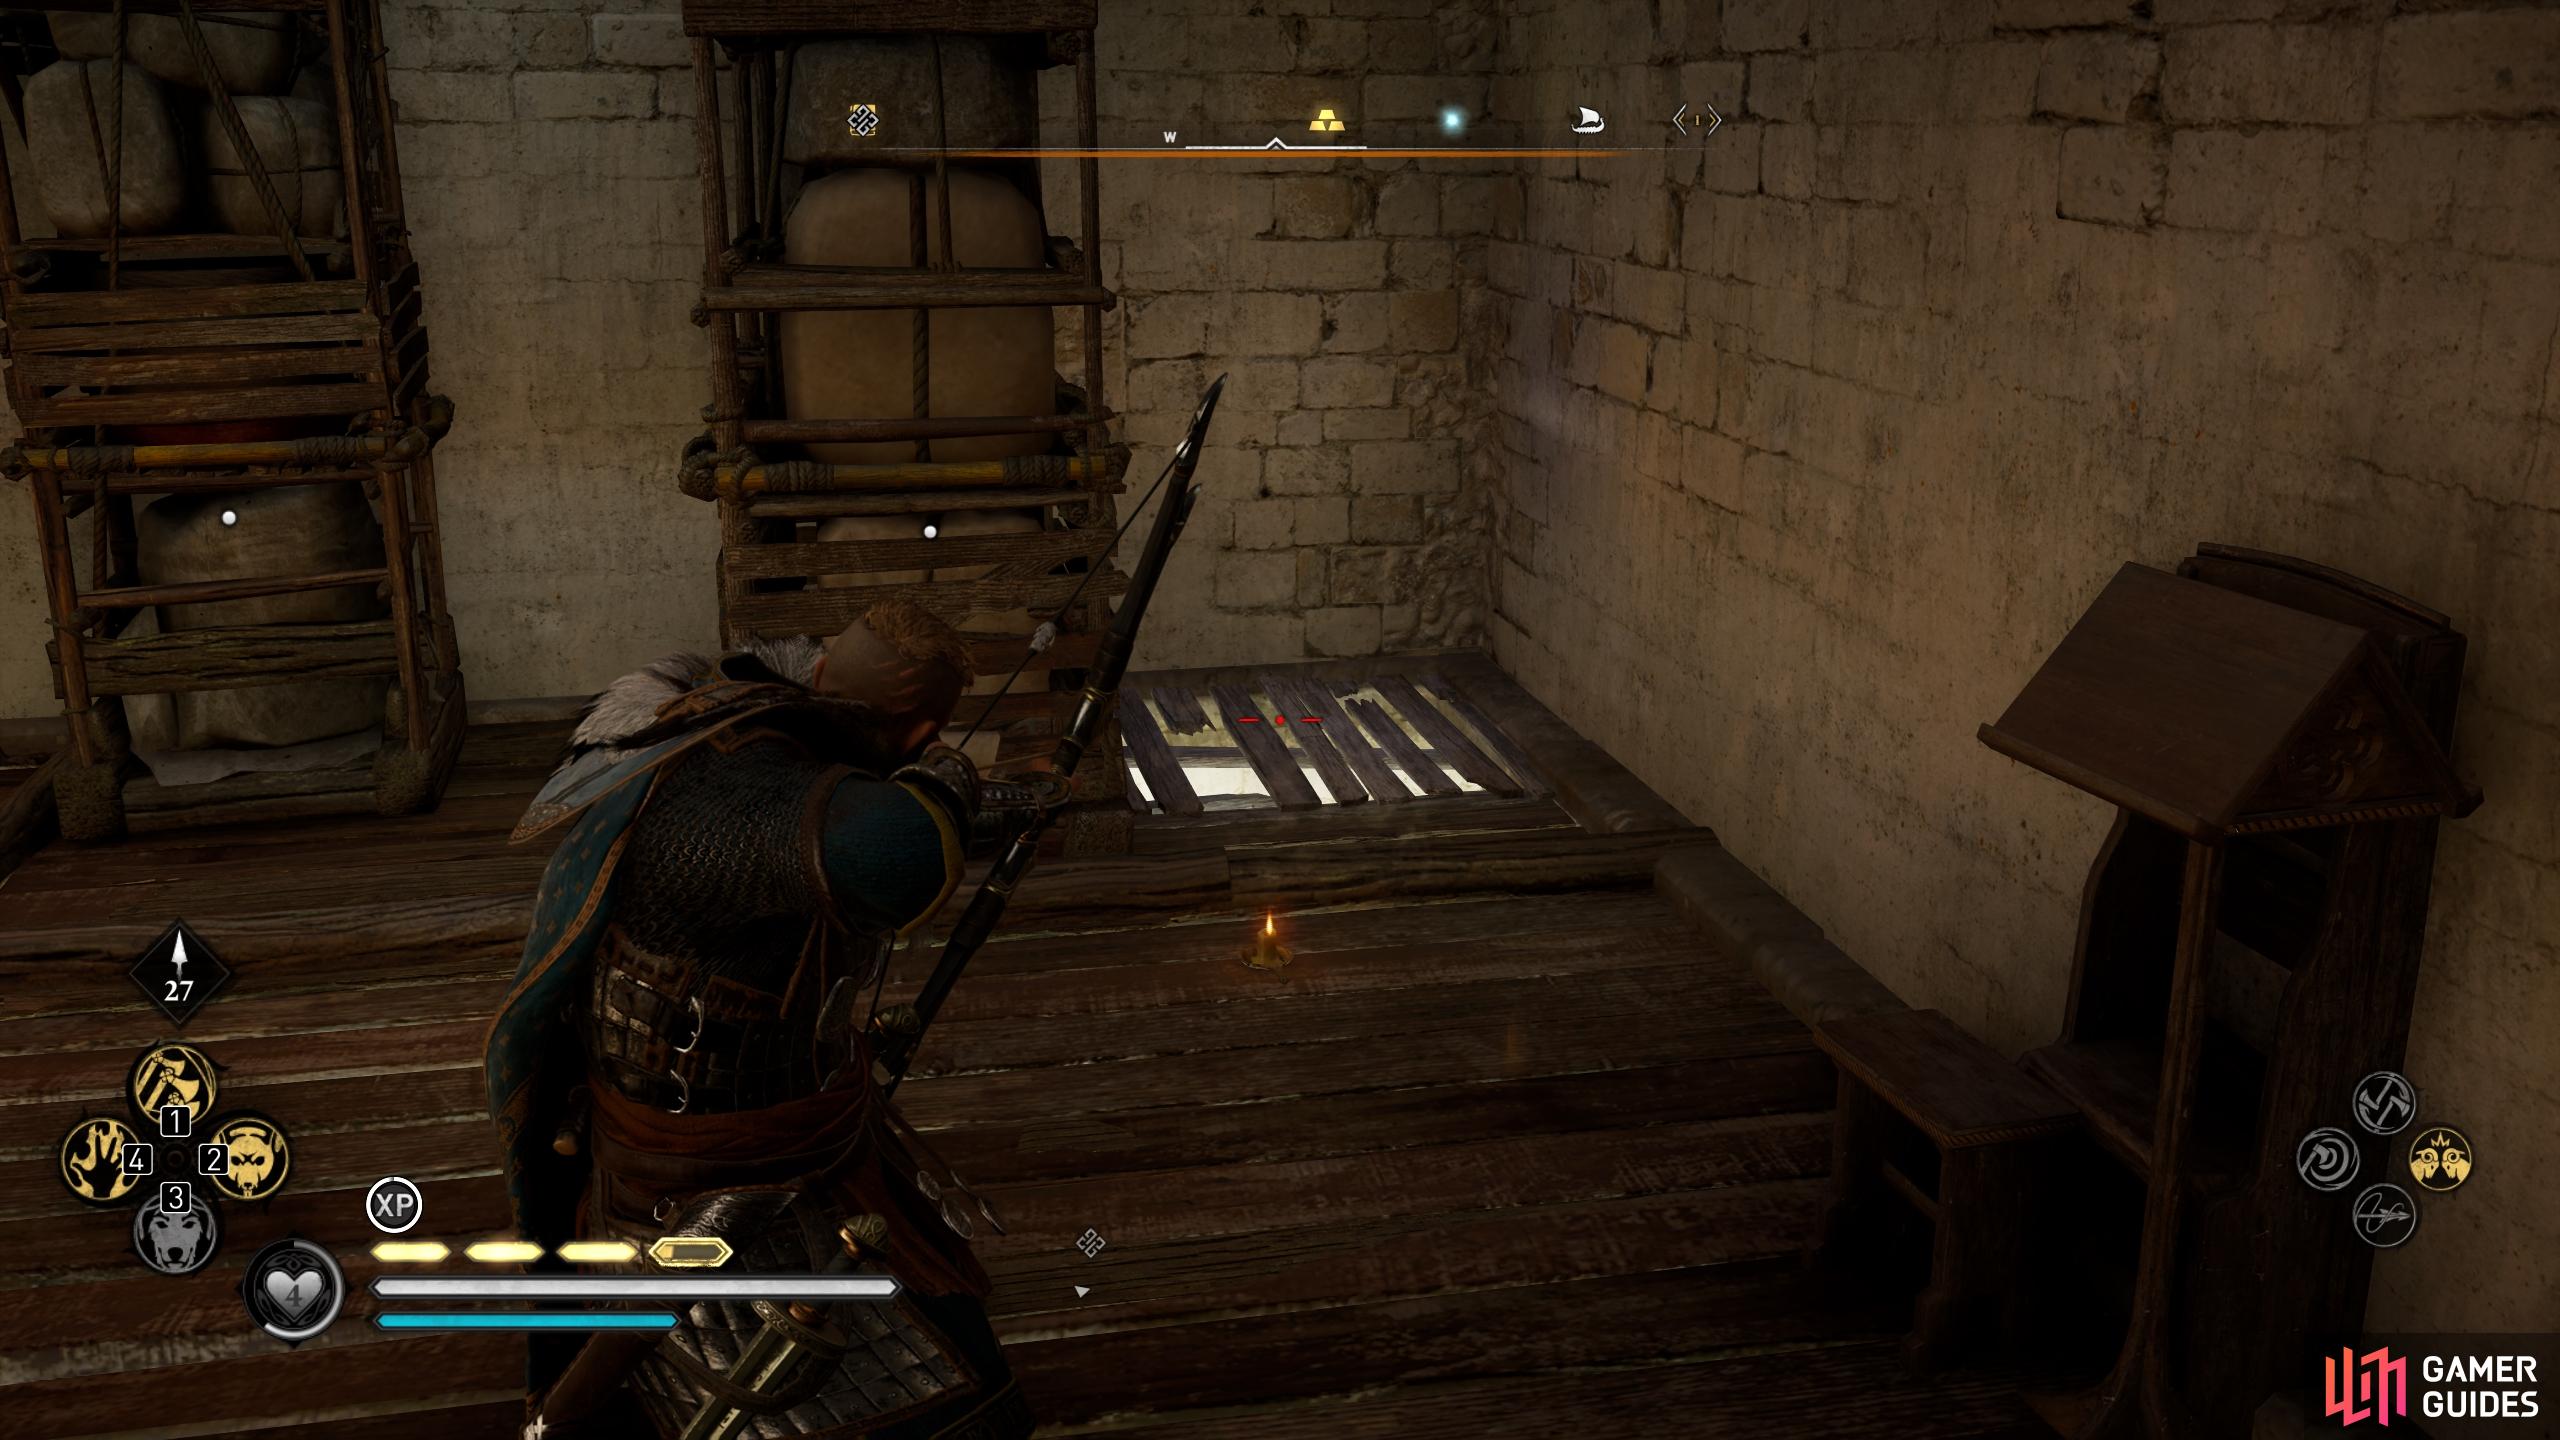 In the first hidden room, you'll find some barricades in the northwestern part of it. Move these to shoot another wooden barrier beneath them.